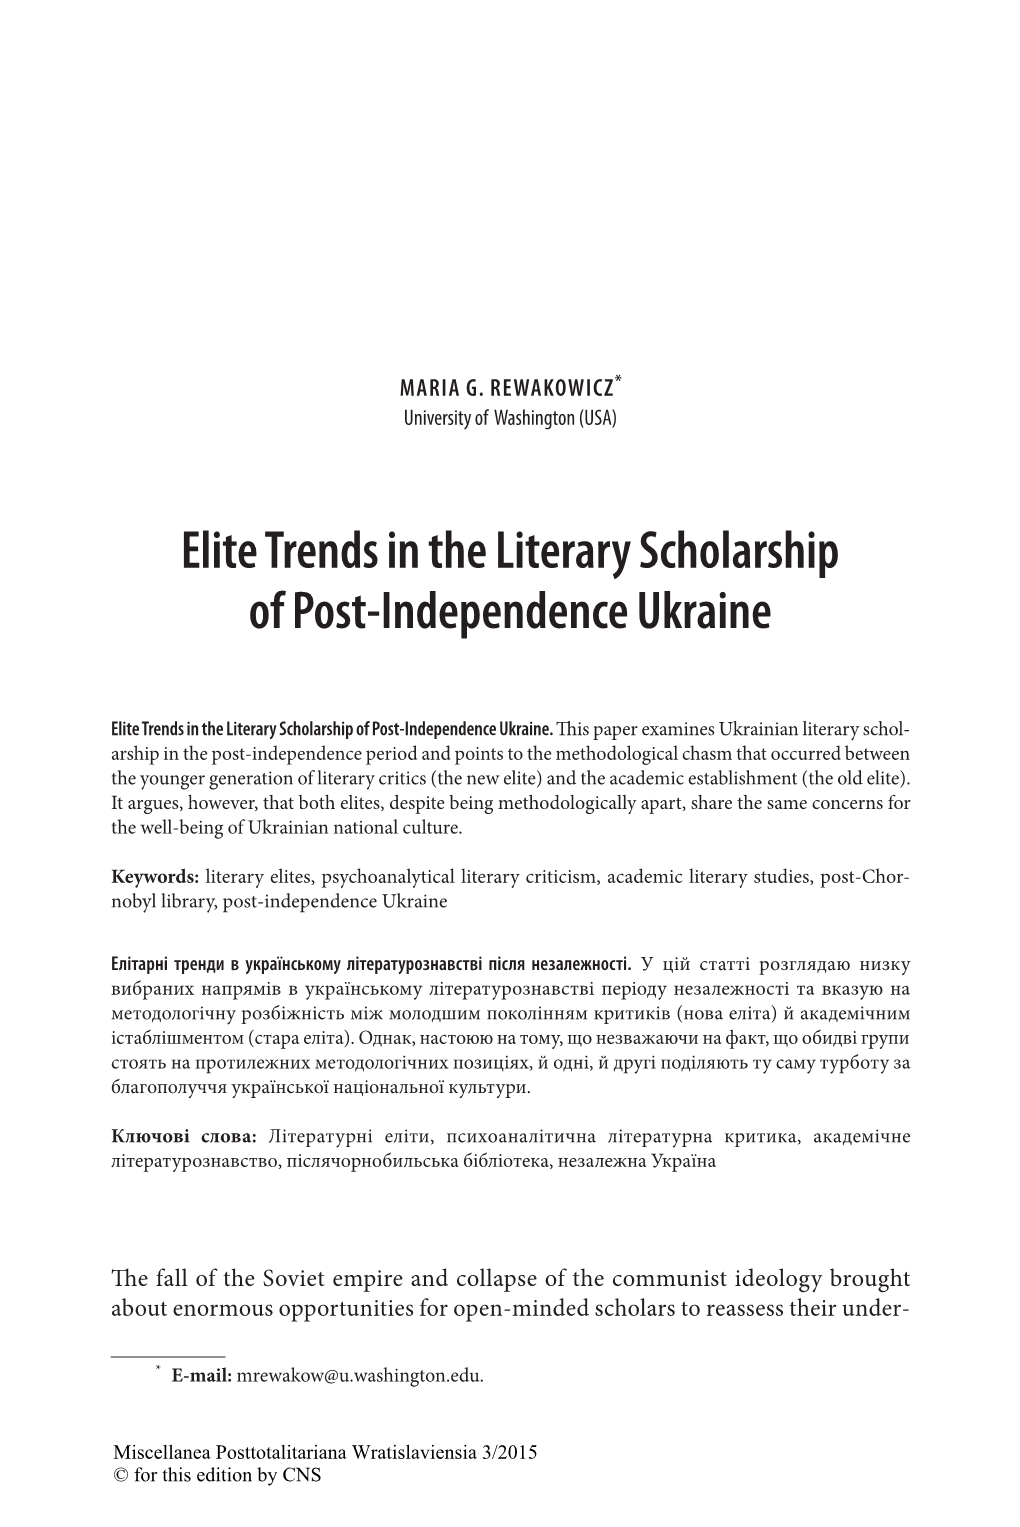 Elite Trends in the Literary Scholarship of Post-Independence Ukraine